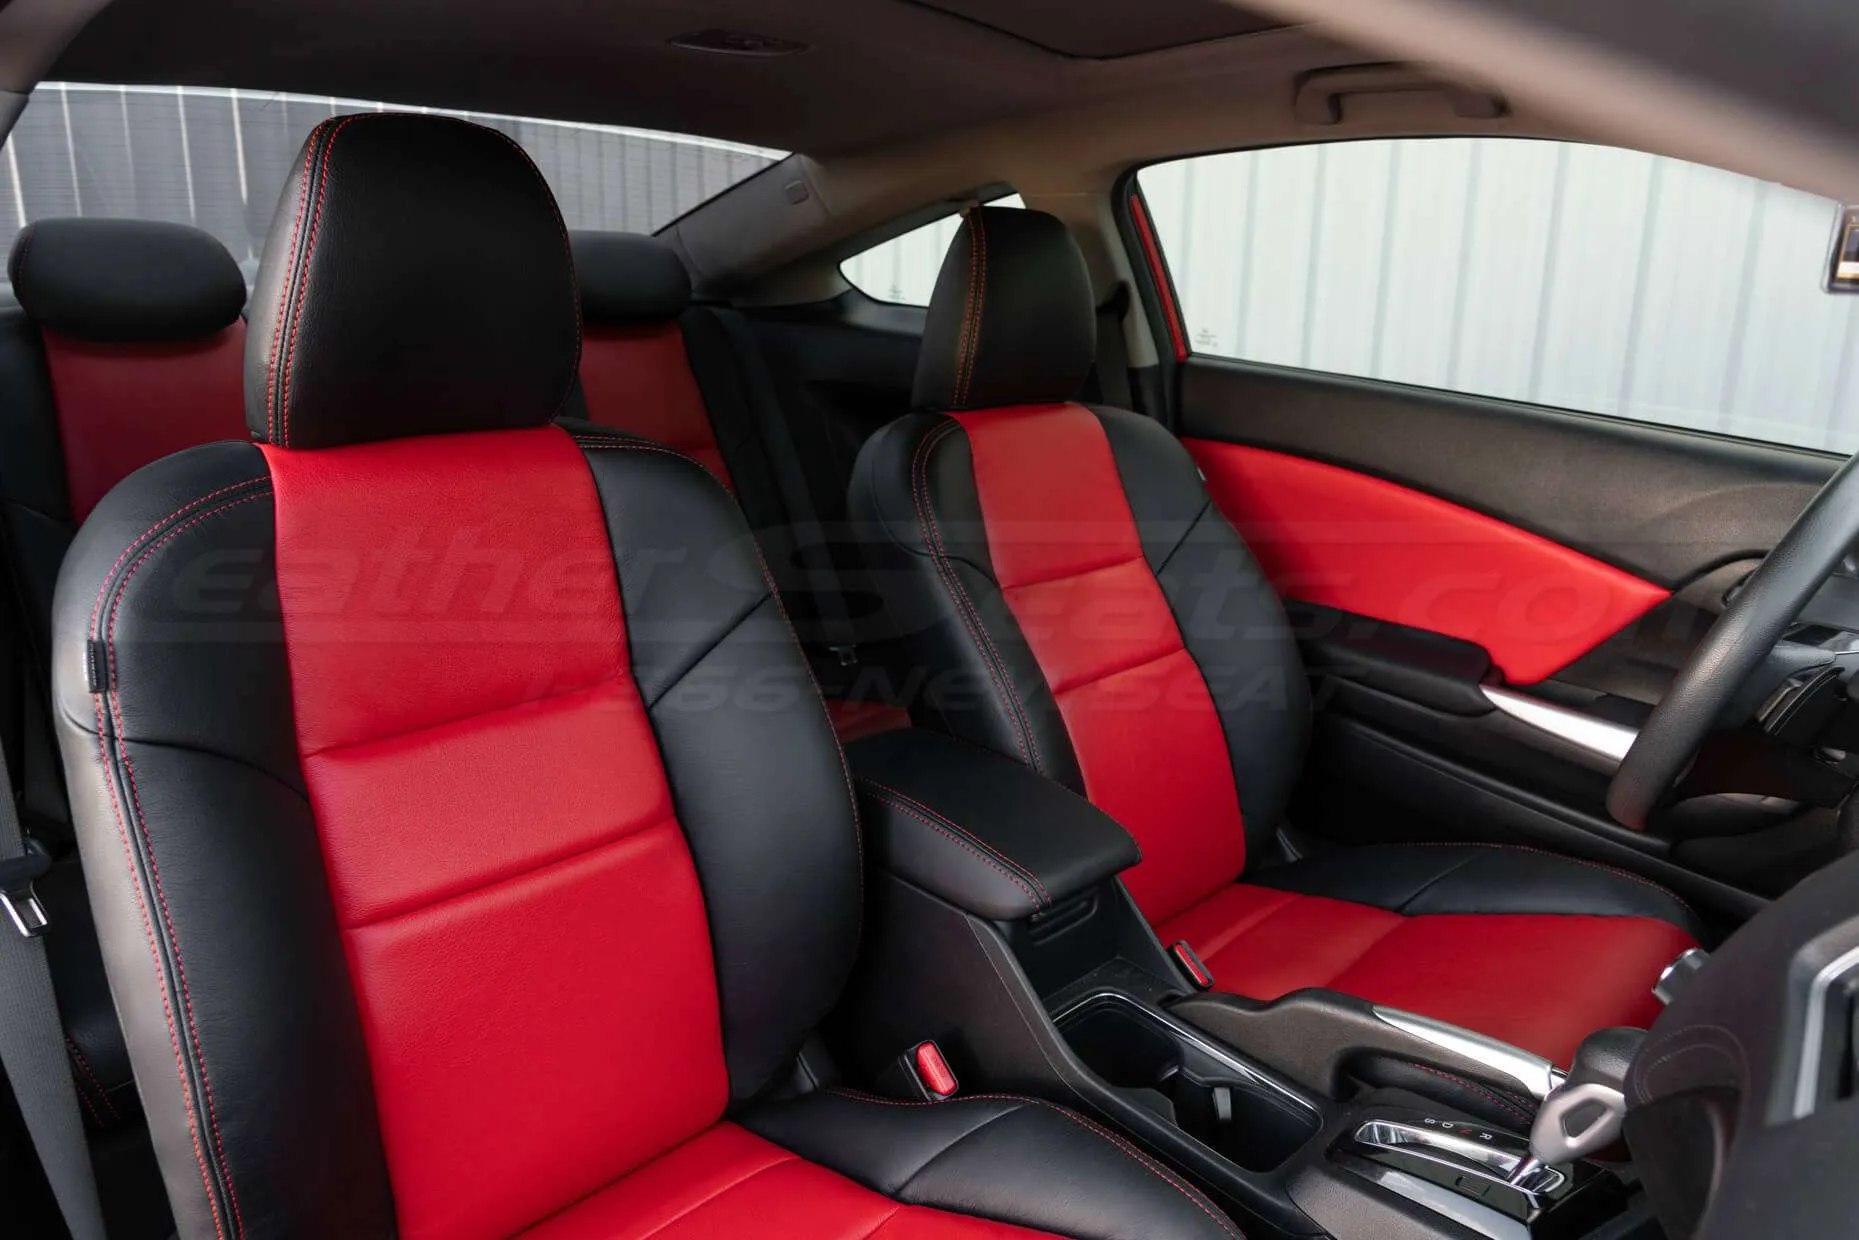 Honda Civic installed leather kit - Black & Bright Red - Front interior